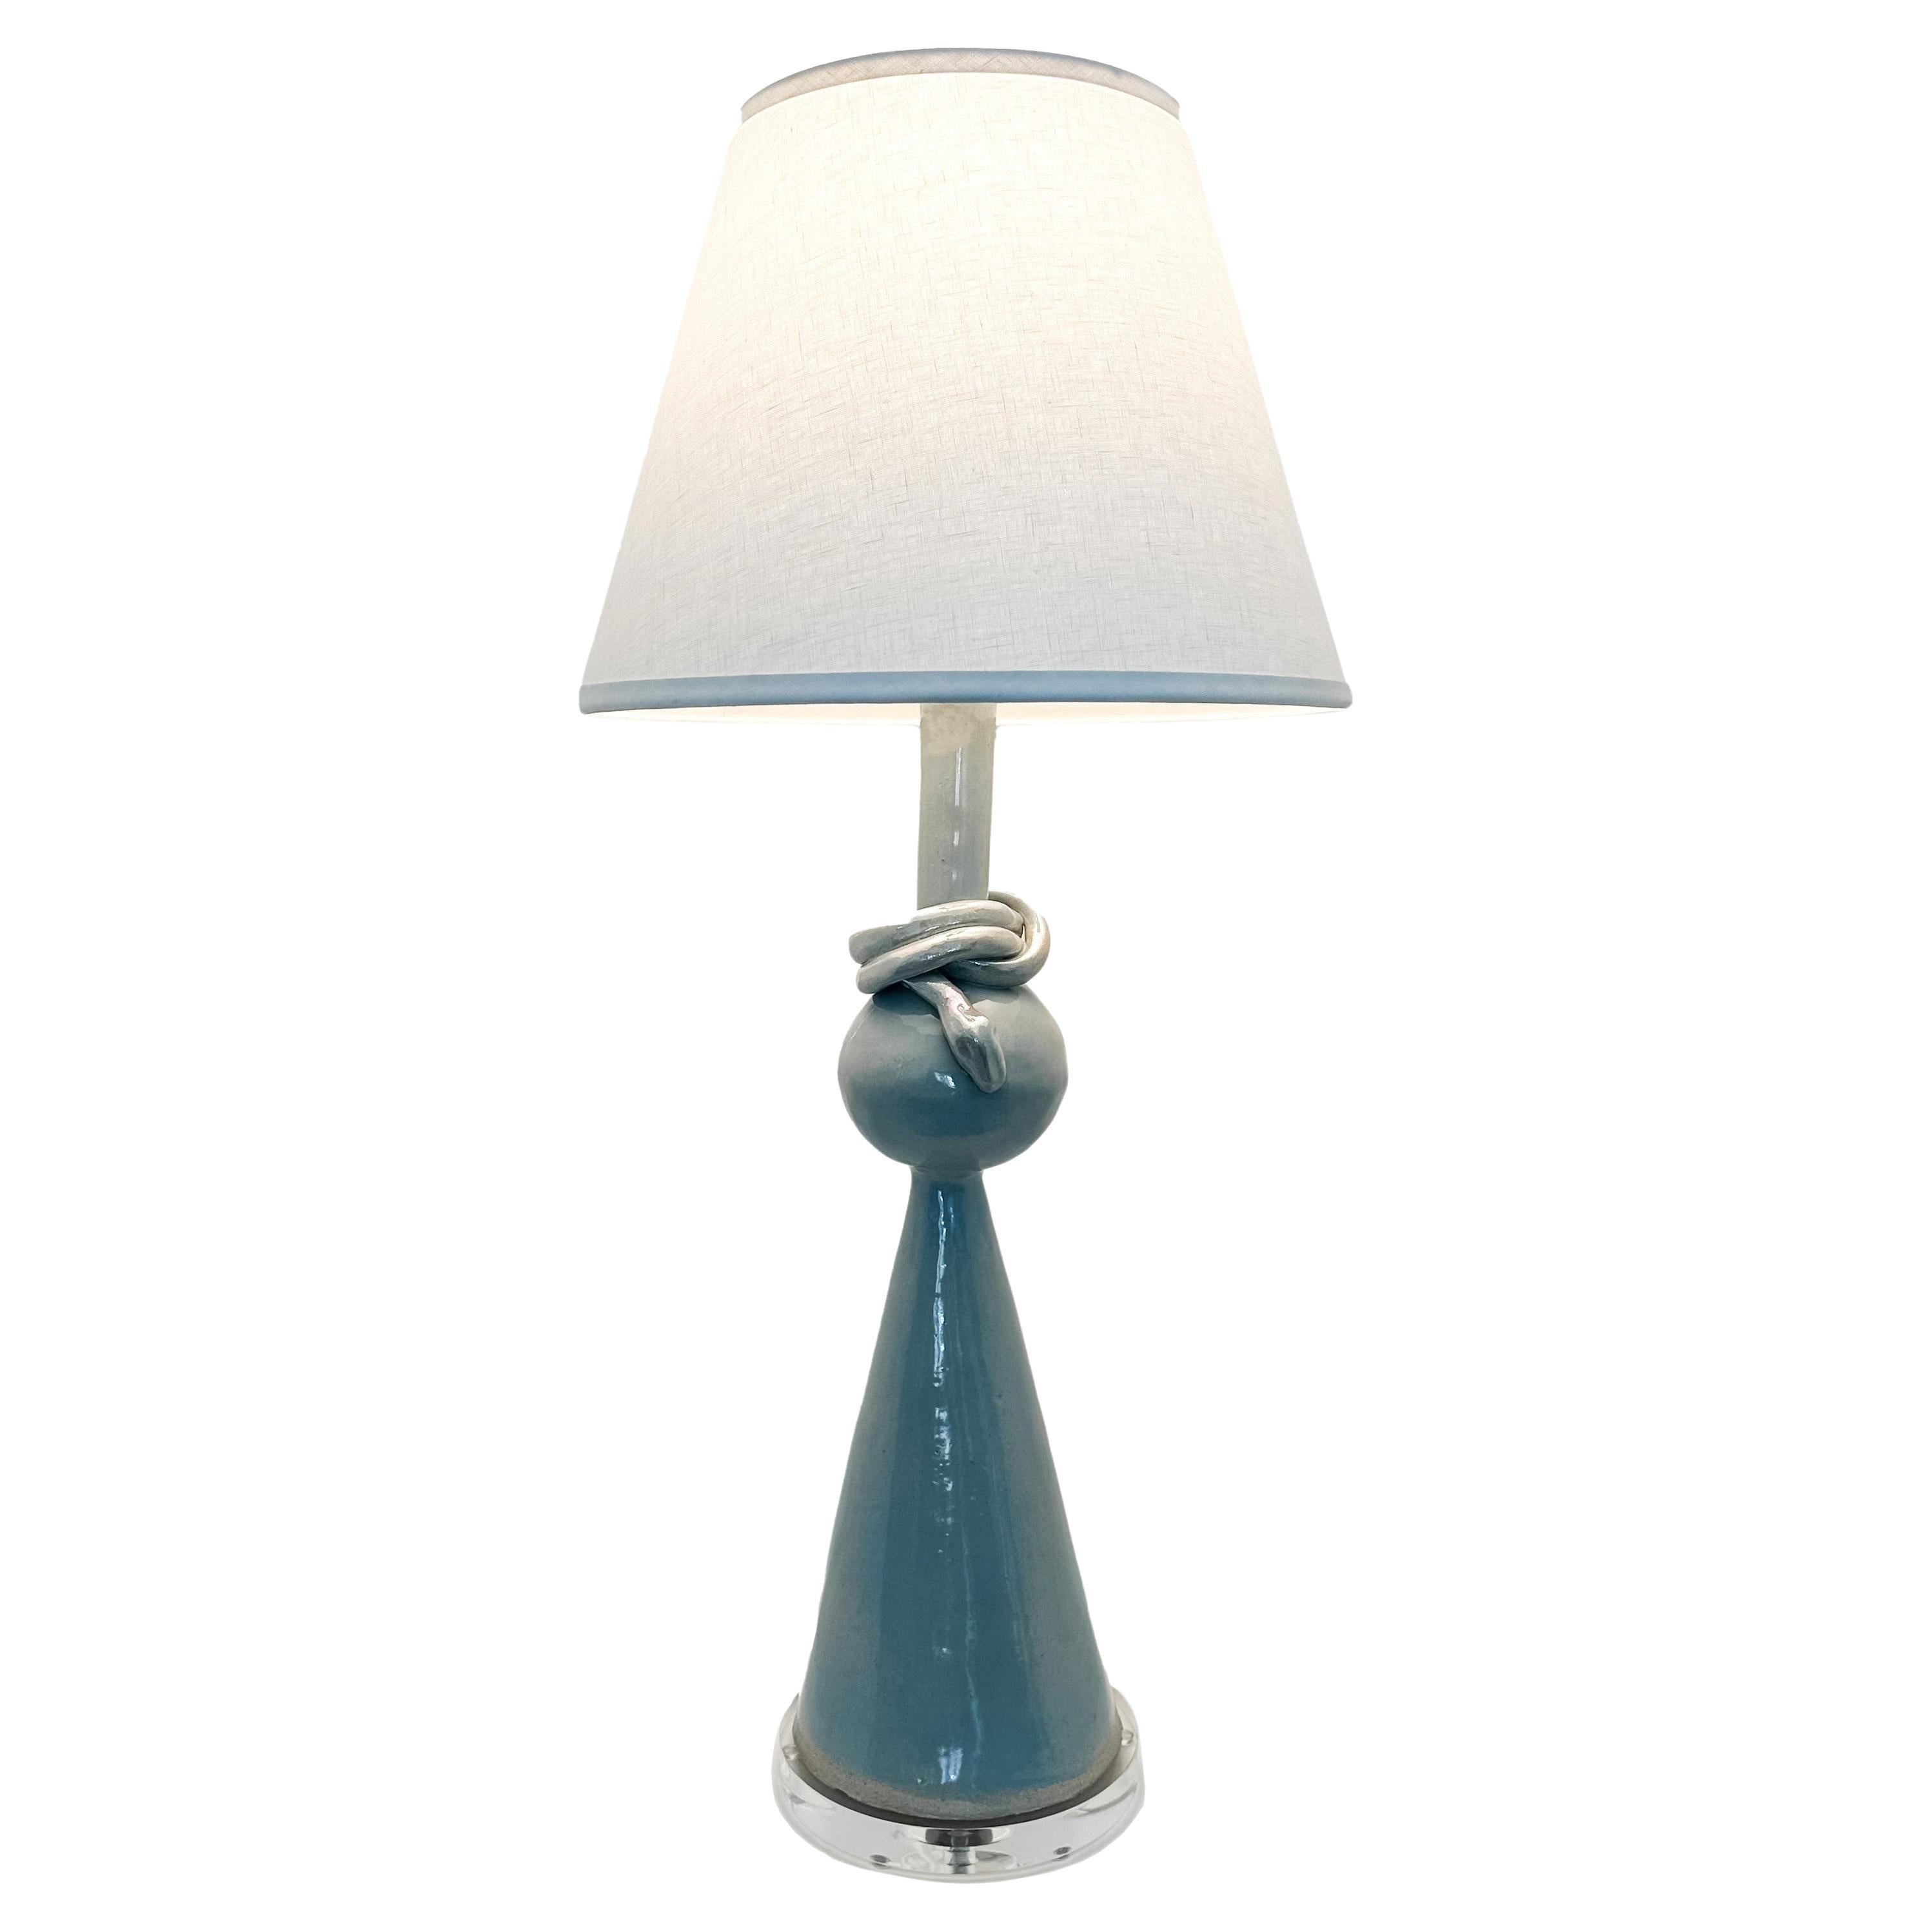 Geo Table Lamp with Serpent Twist in Wedgwood Glaze on Lucite Base For Sale